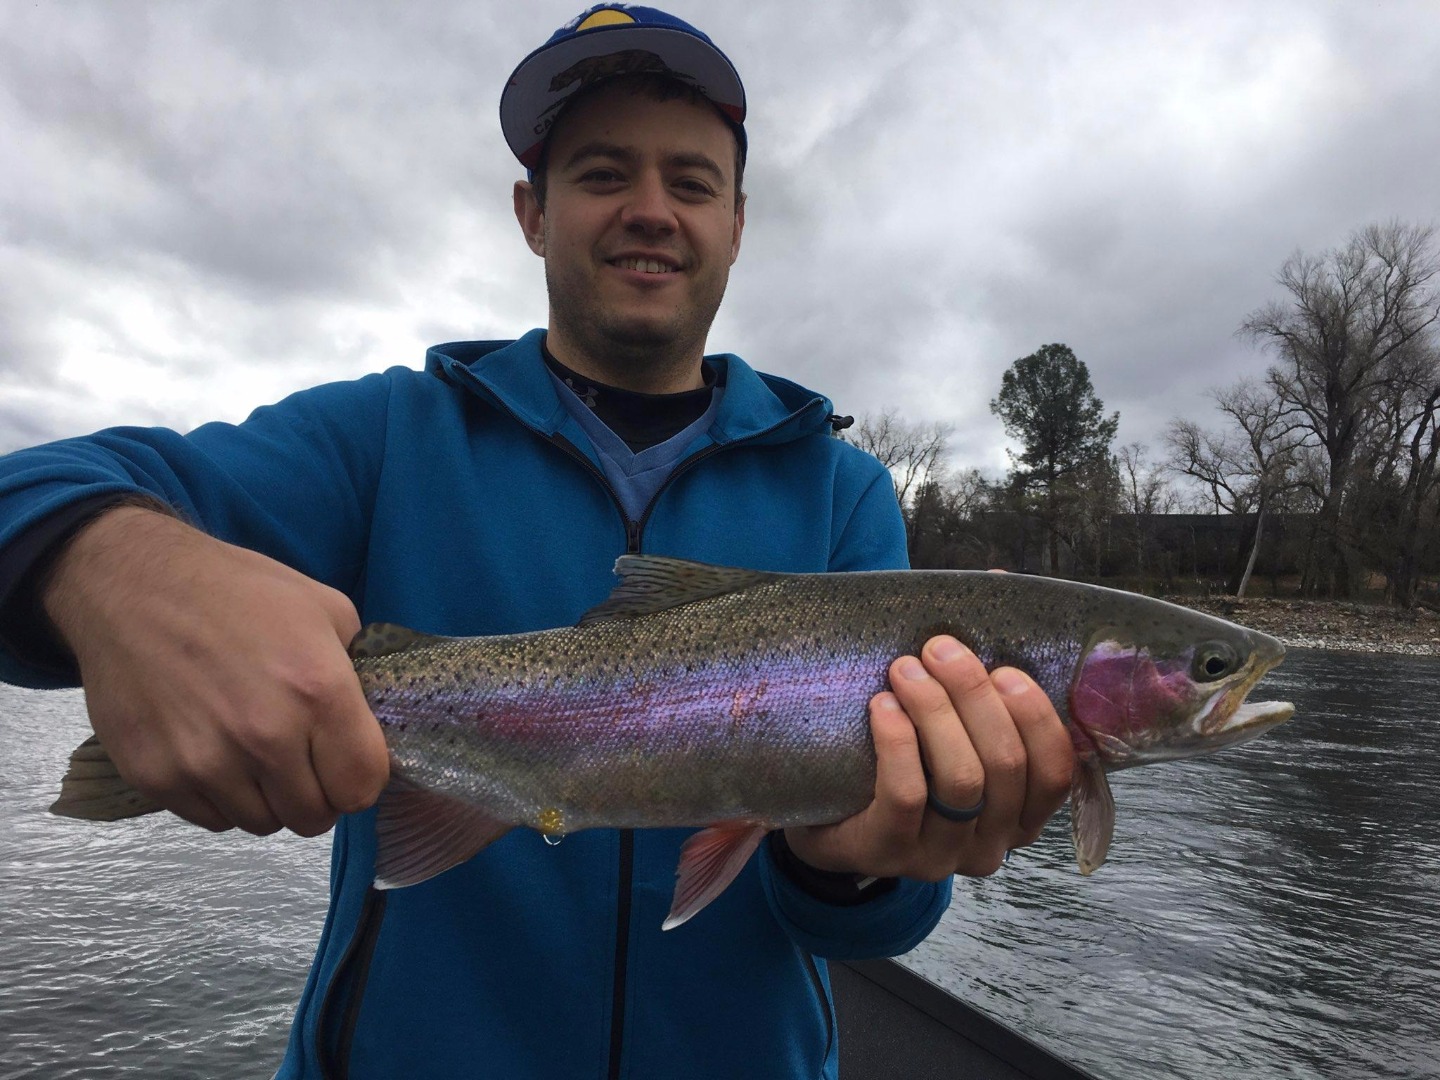 Big trout are hitting!